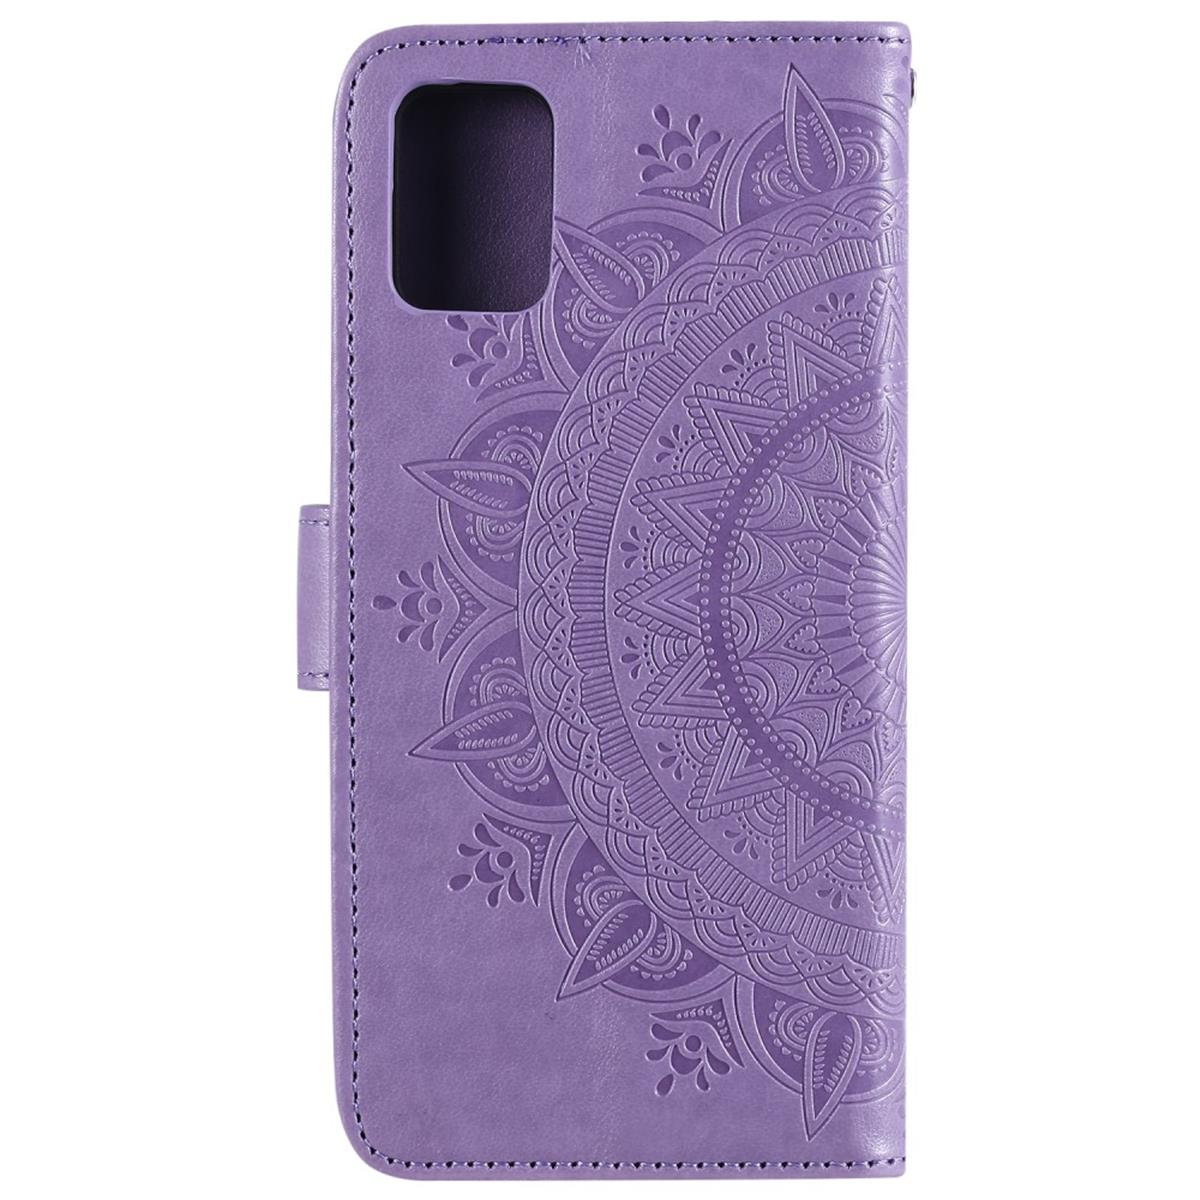 COVERKINGZ Klapphülle mit Mandala Muster, Galaxy Bookcover, Samsung, A31, Lila